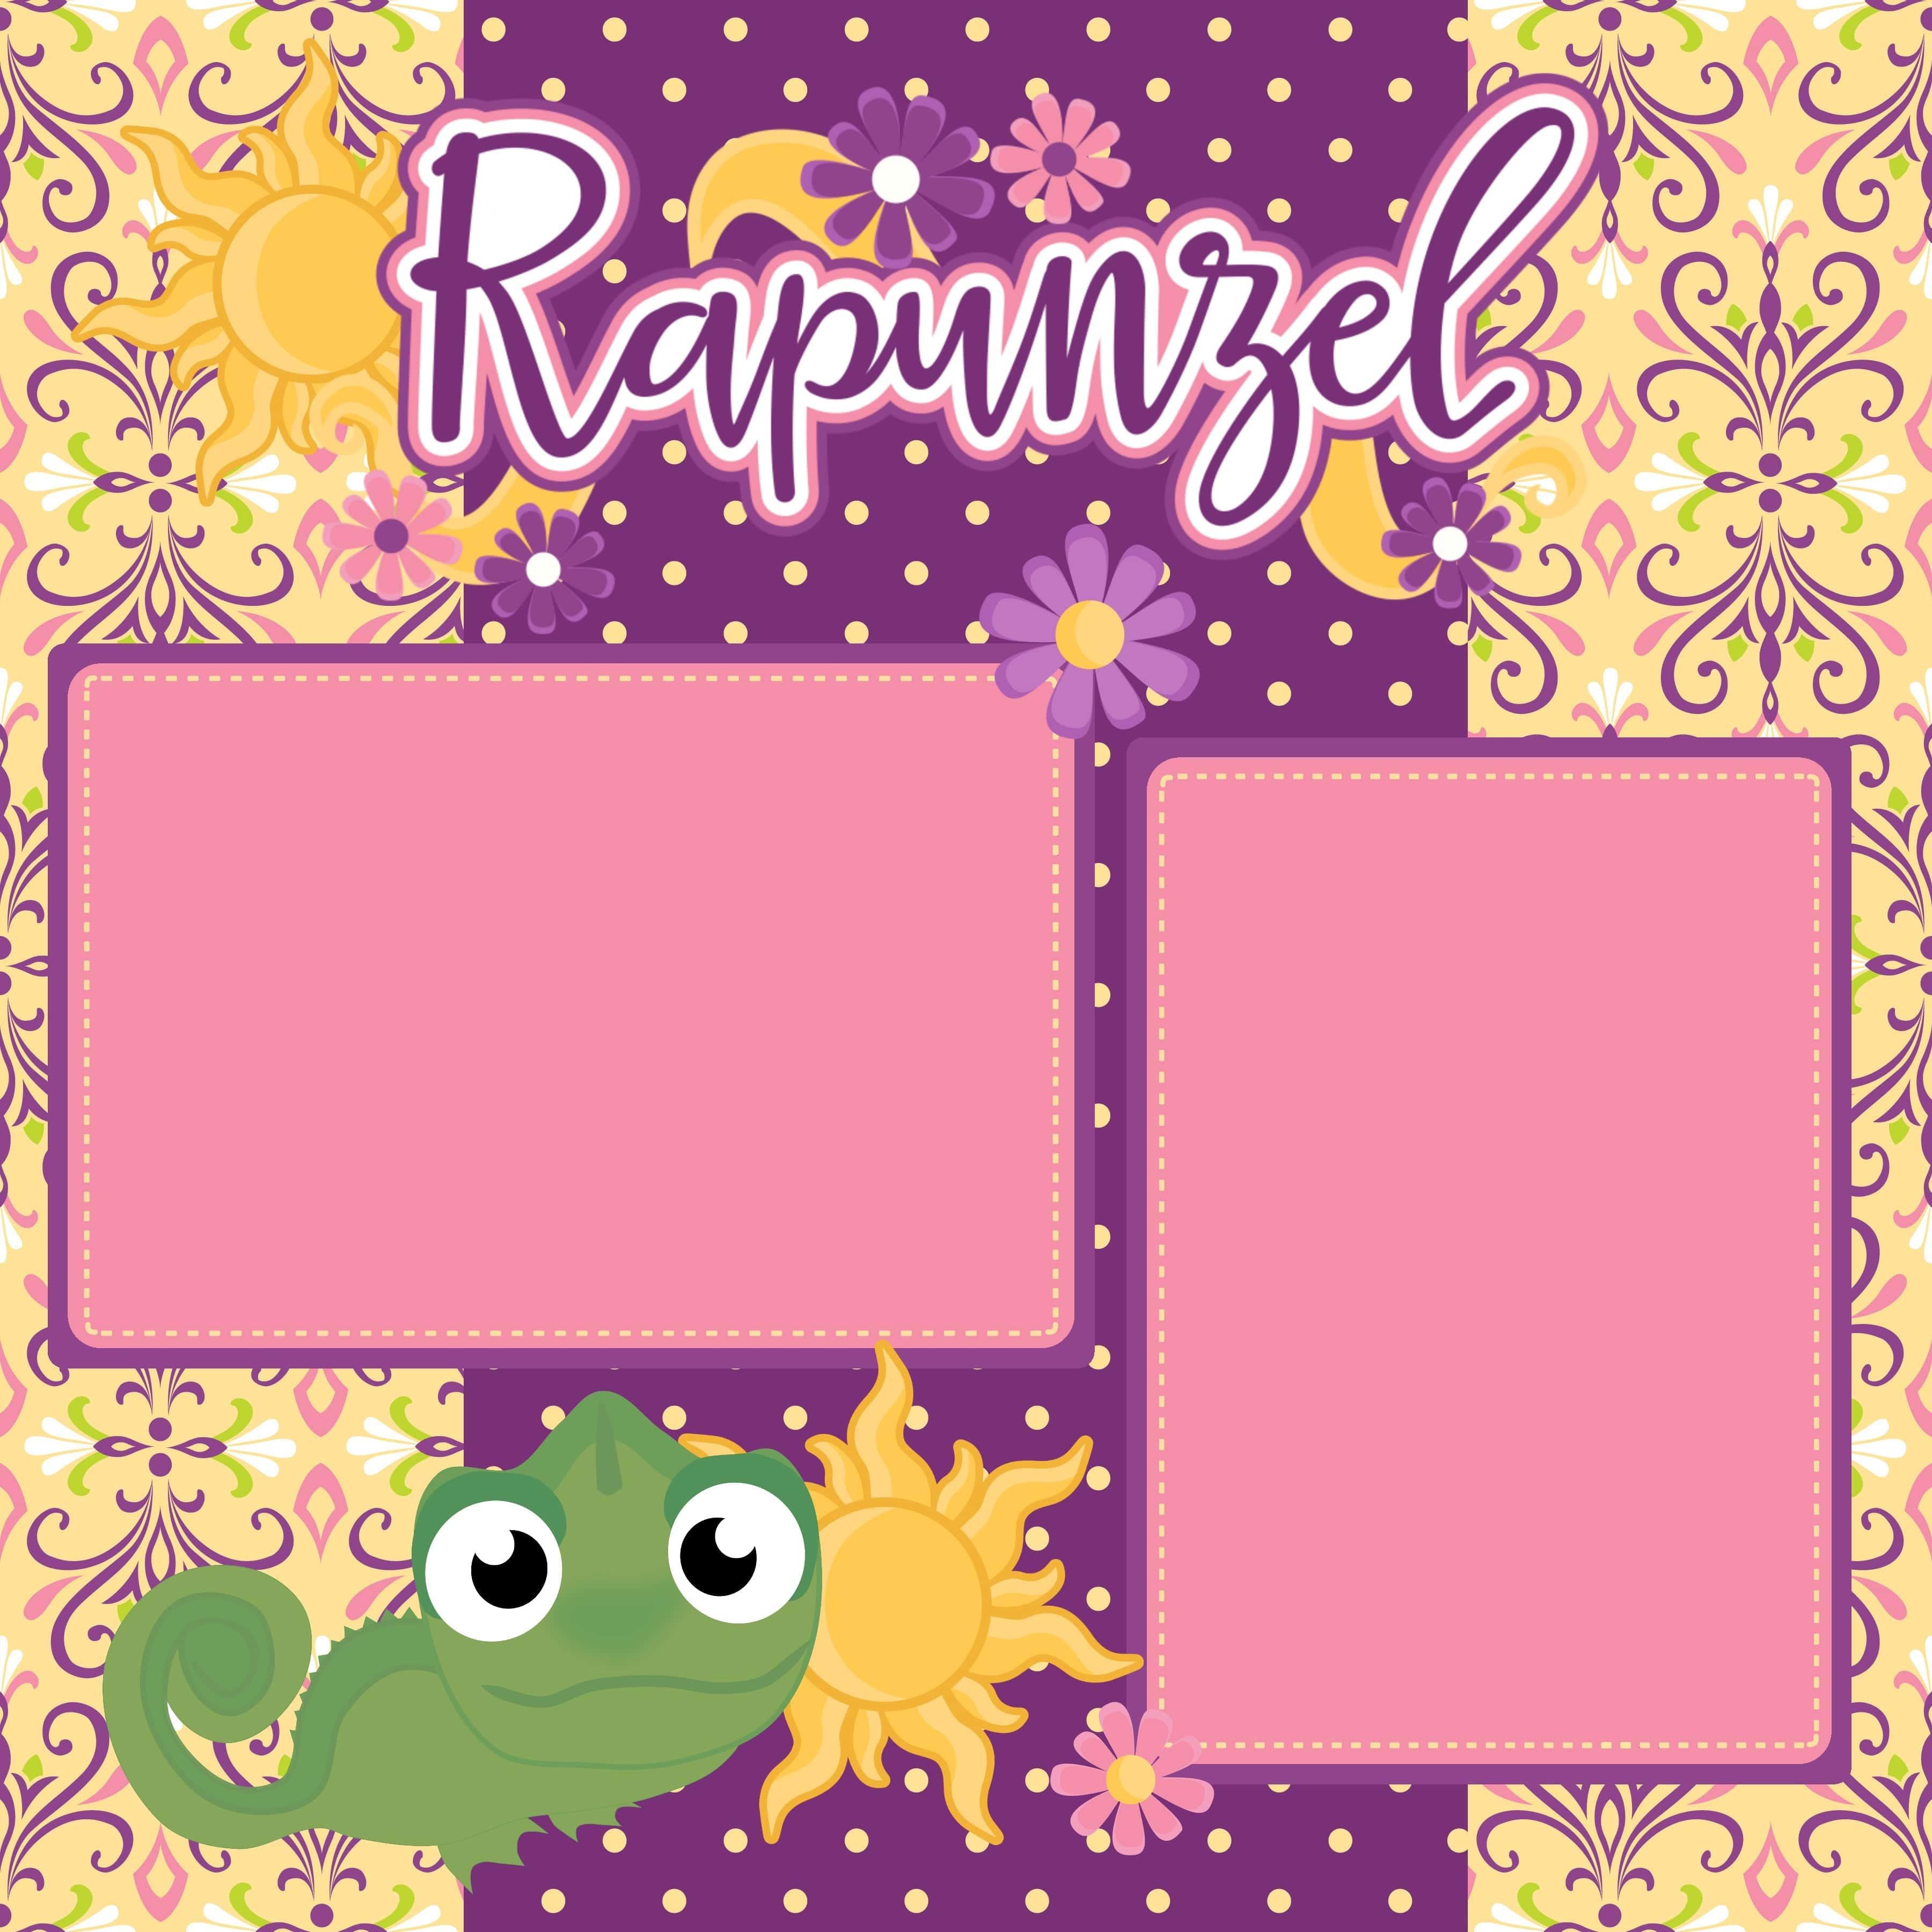 Rapunzel (2) - 12 x 12 Premade, Printed Scrapbook Pages by SSC Designs - Scrapbook Supply Companies